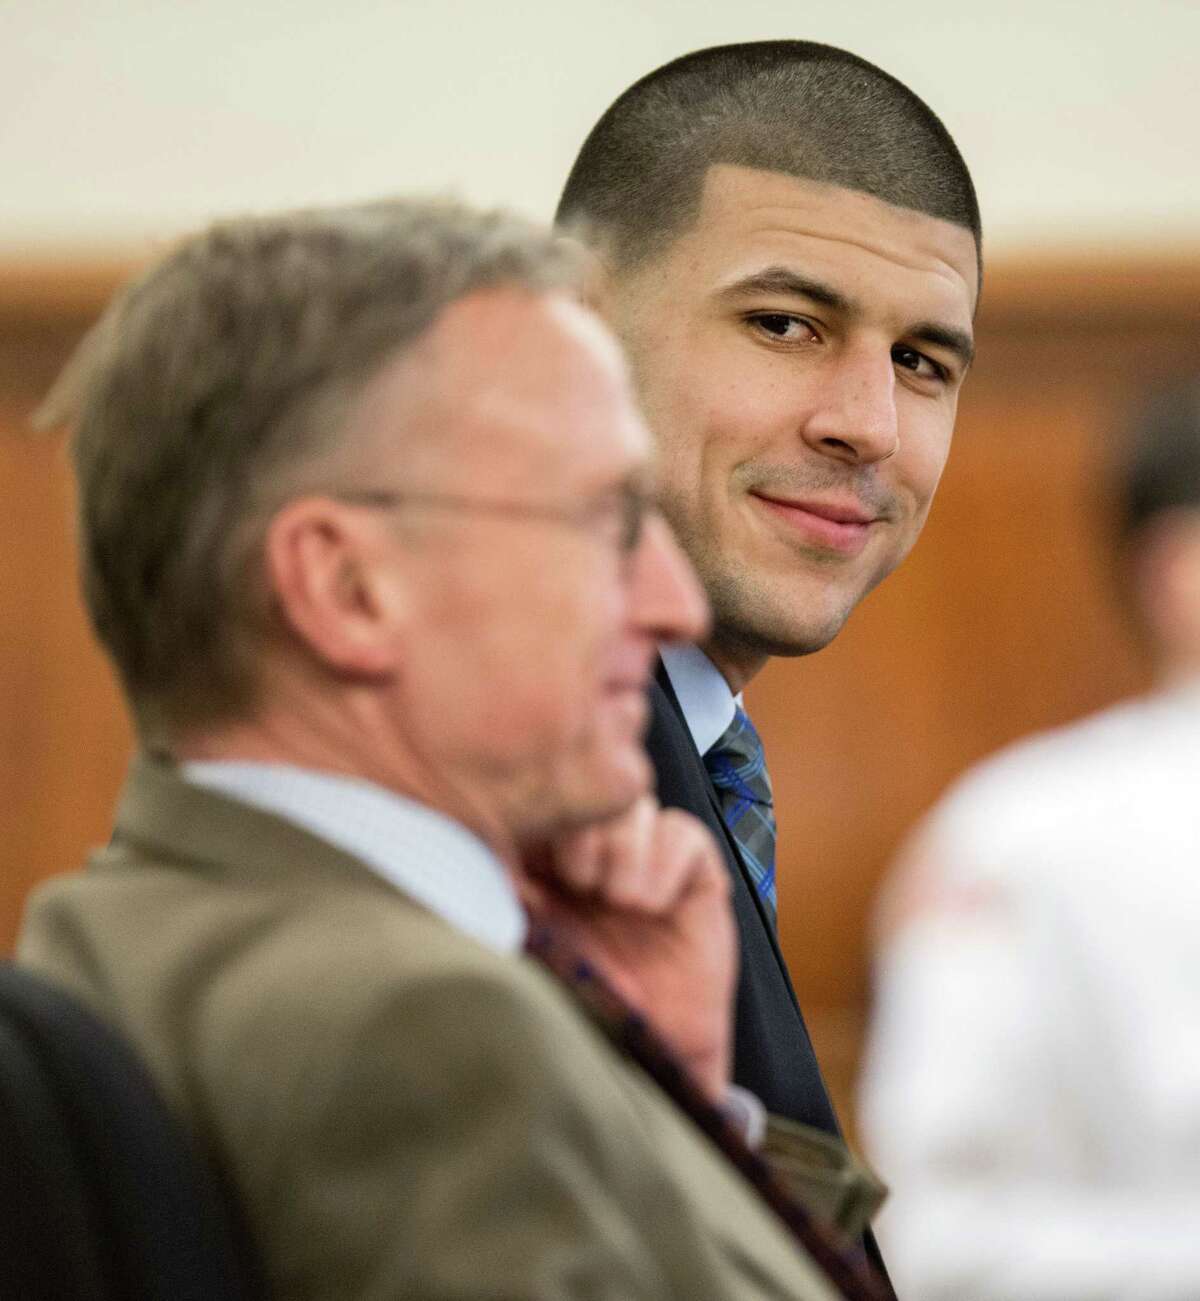 Former New England Patriots football player Aaron Hernandez, right, smiles at his attorney Charles Rankin during his murder trial, Tuesday, March 31, 2015, at Bristol County Superior Court in Fall River, Mass. Hernandez is accused of killing Odin Lloyd in June 2013. (AP Photo/The Boston Globe, Aram Boghosian, Pool)